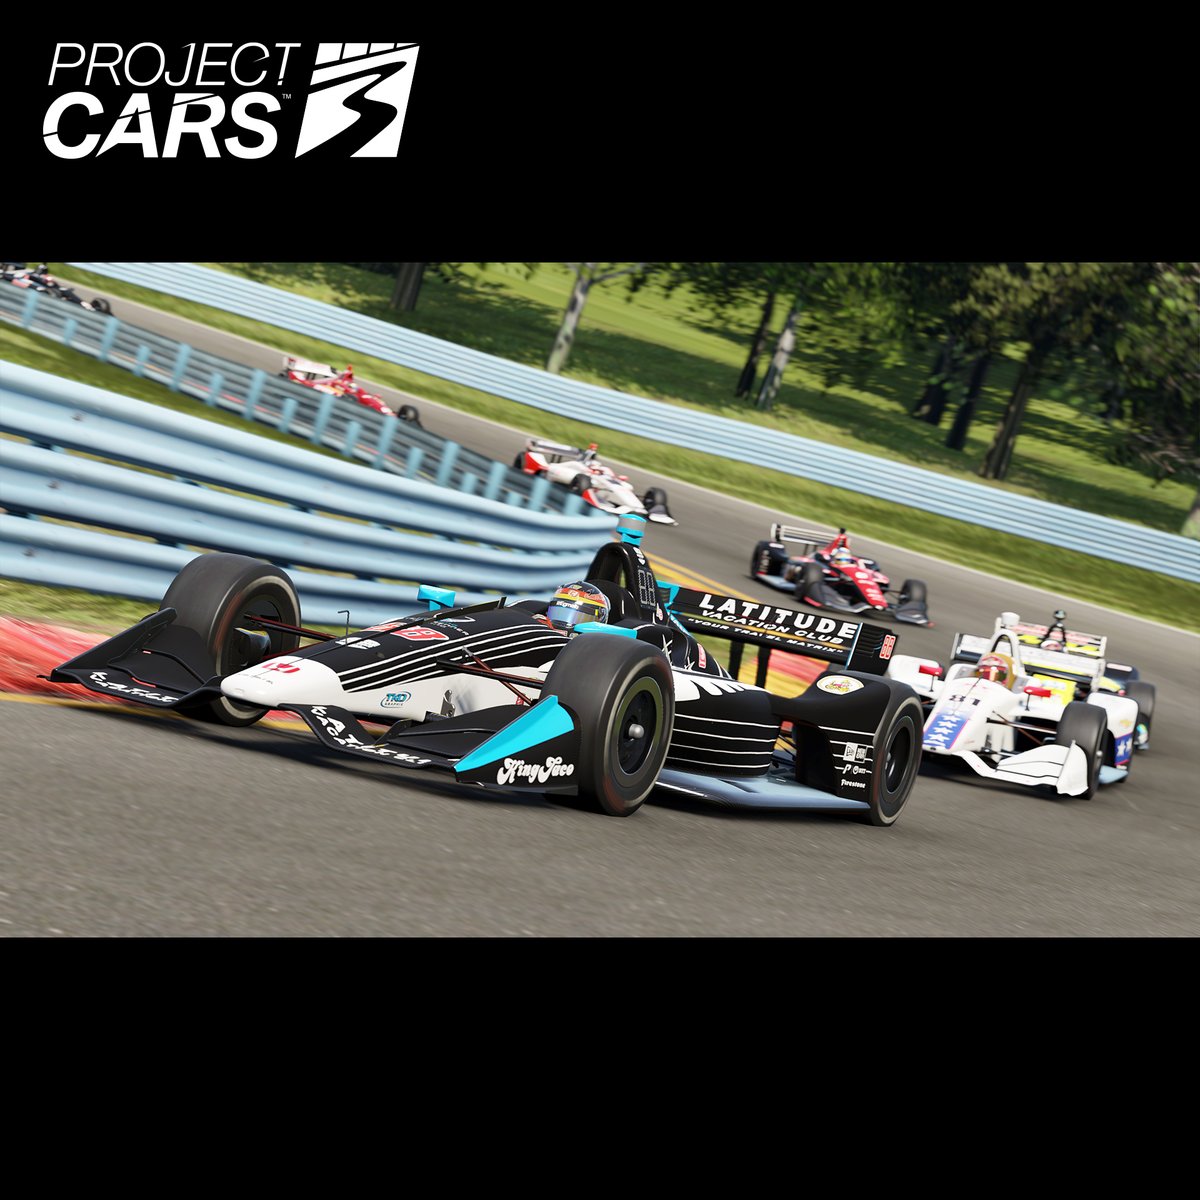 projectcarsgame tweet picture